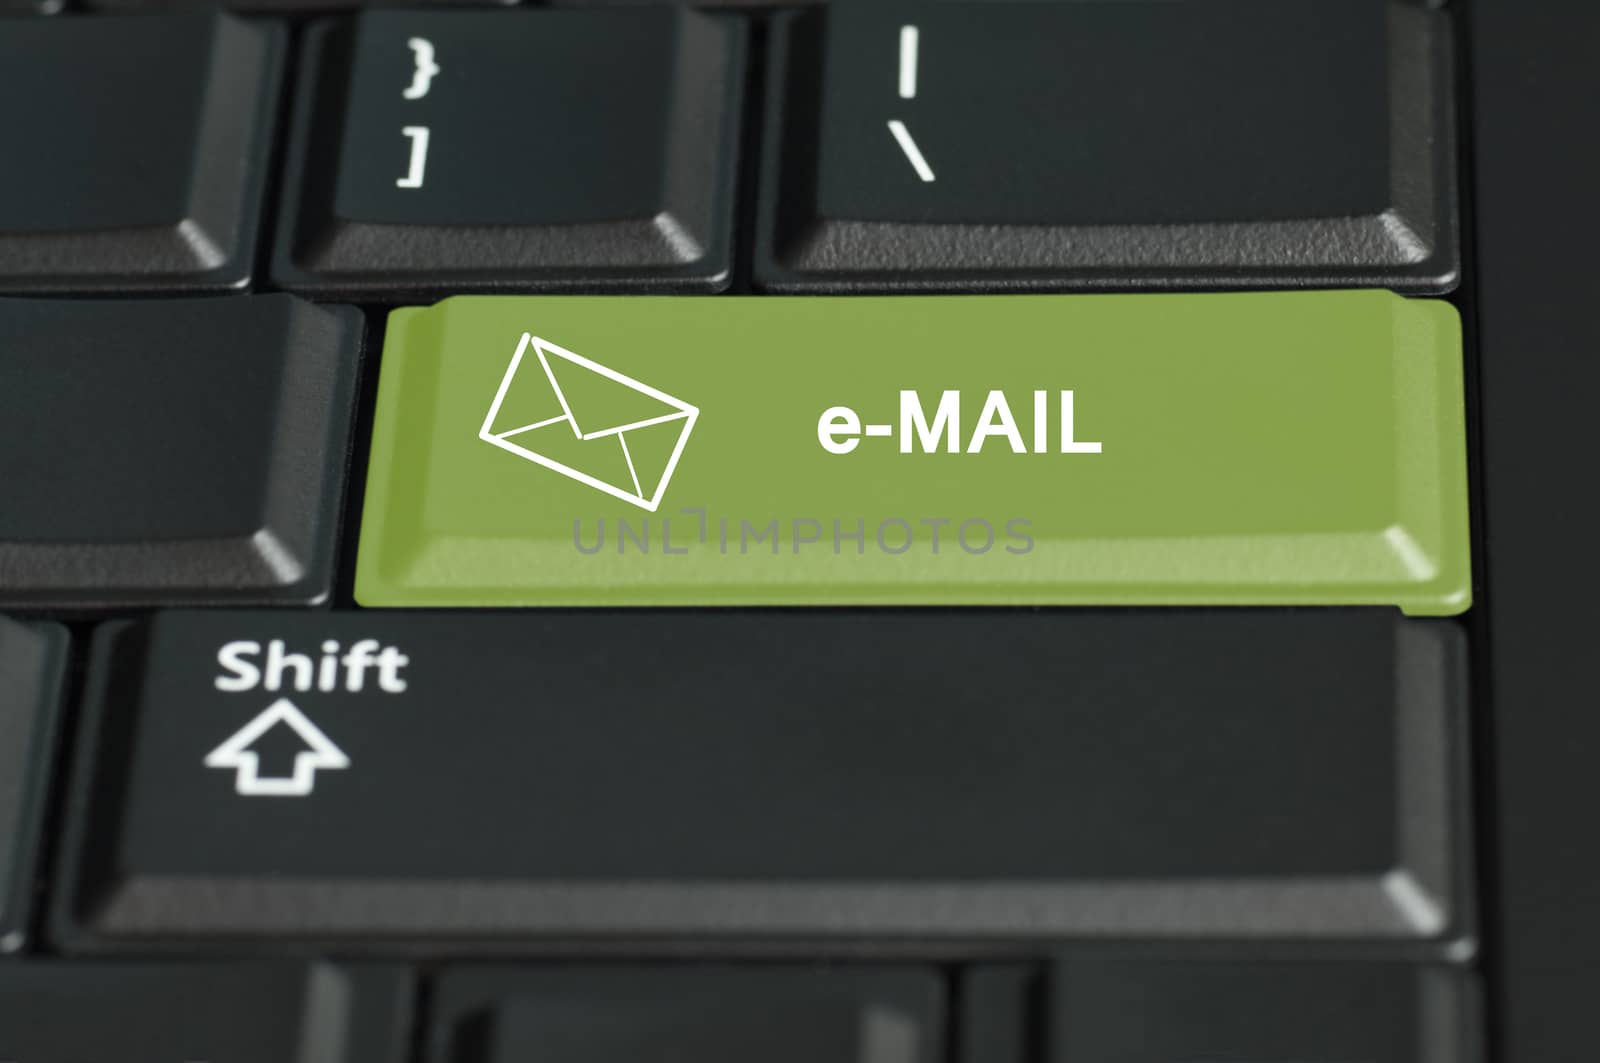 Concept of e-mail action of an online transaction . The focus is on the enter key with the shift button on the bottom